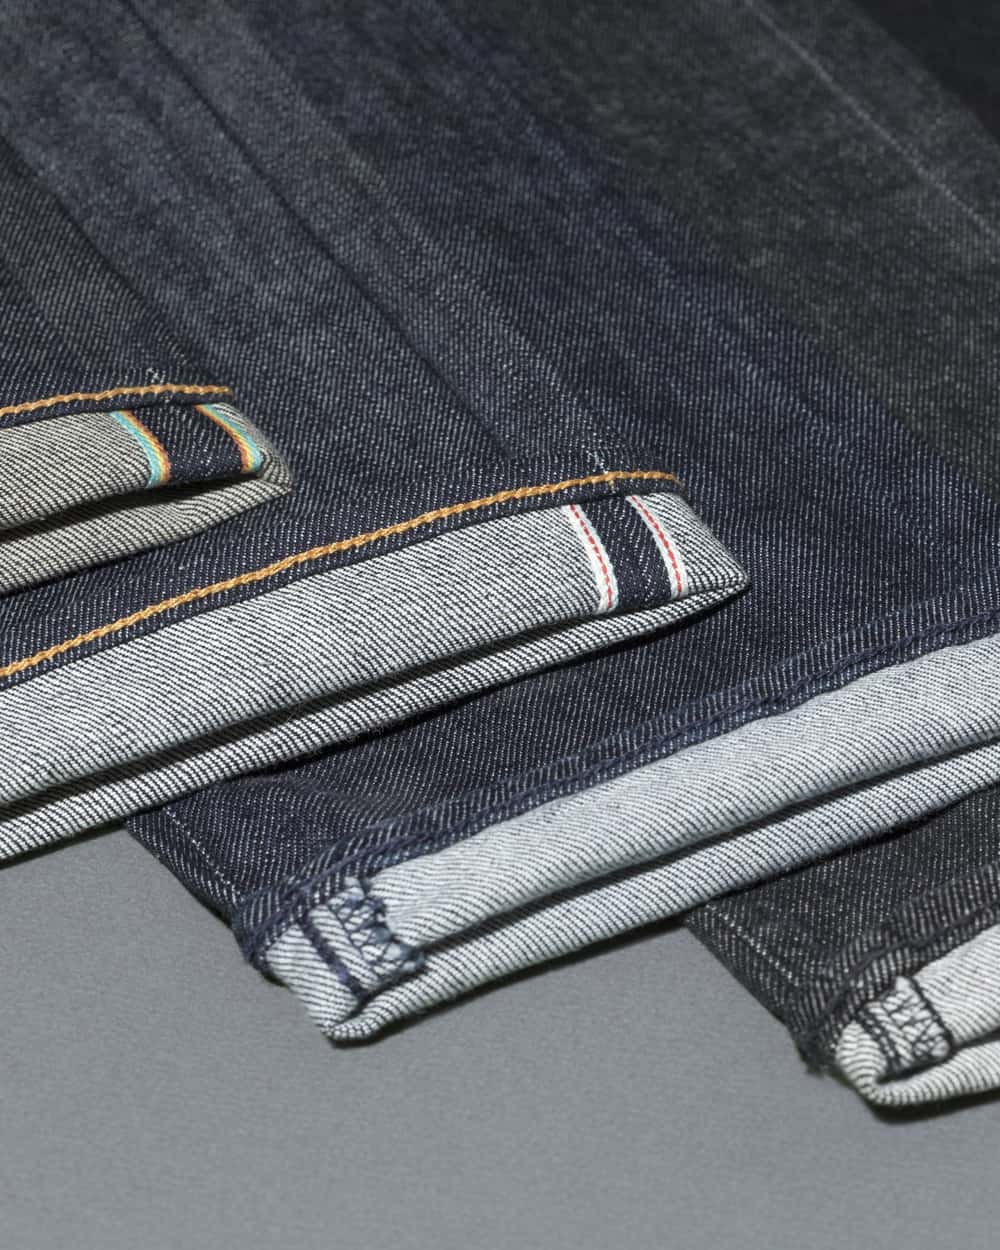 The Best Raw Selvedge Denim Jeans Guide: Read Before You Buy